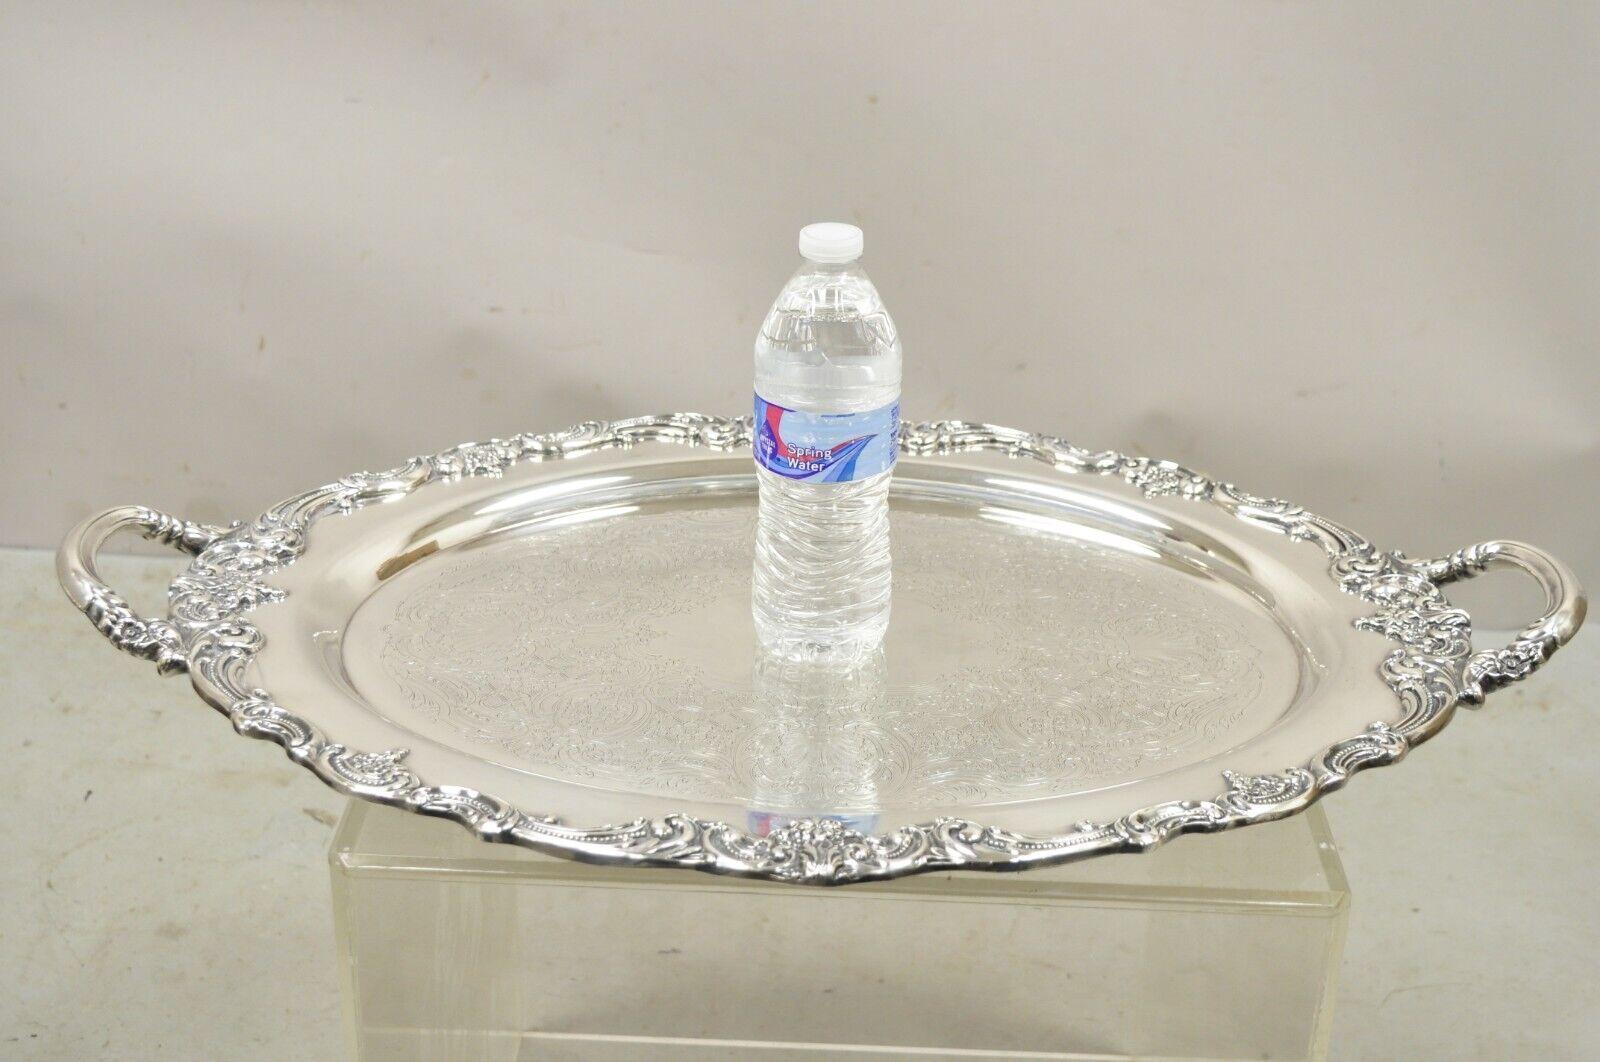 Reed & Barton 1955 25 Silver Plated Oval Twin Handle Large Serving Platter Tray For Sale 2